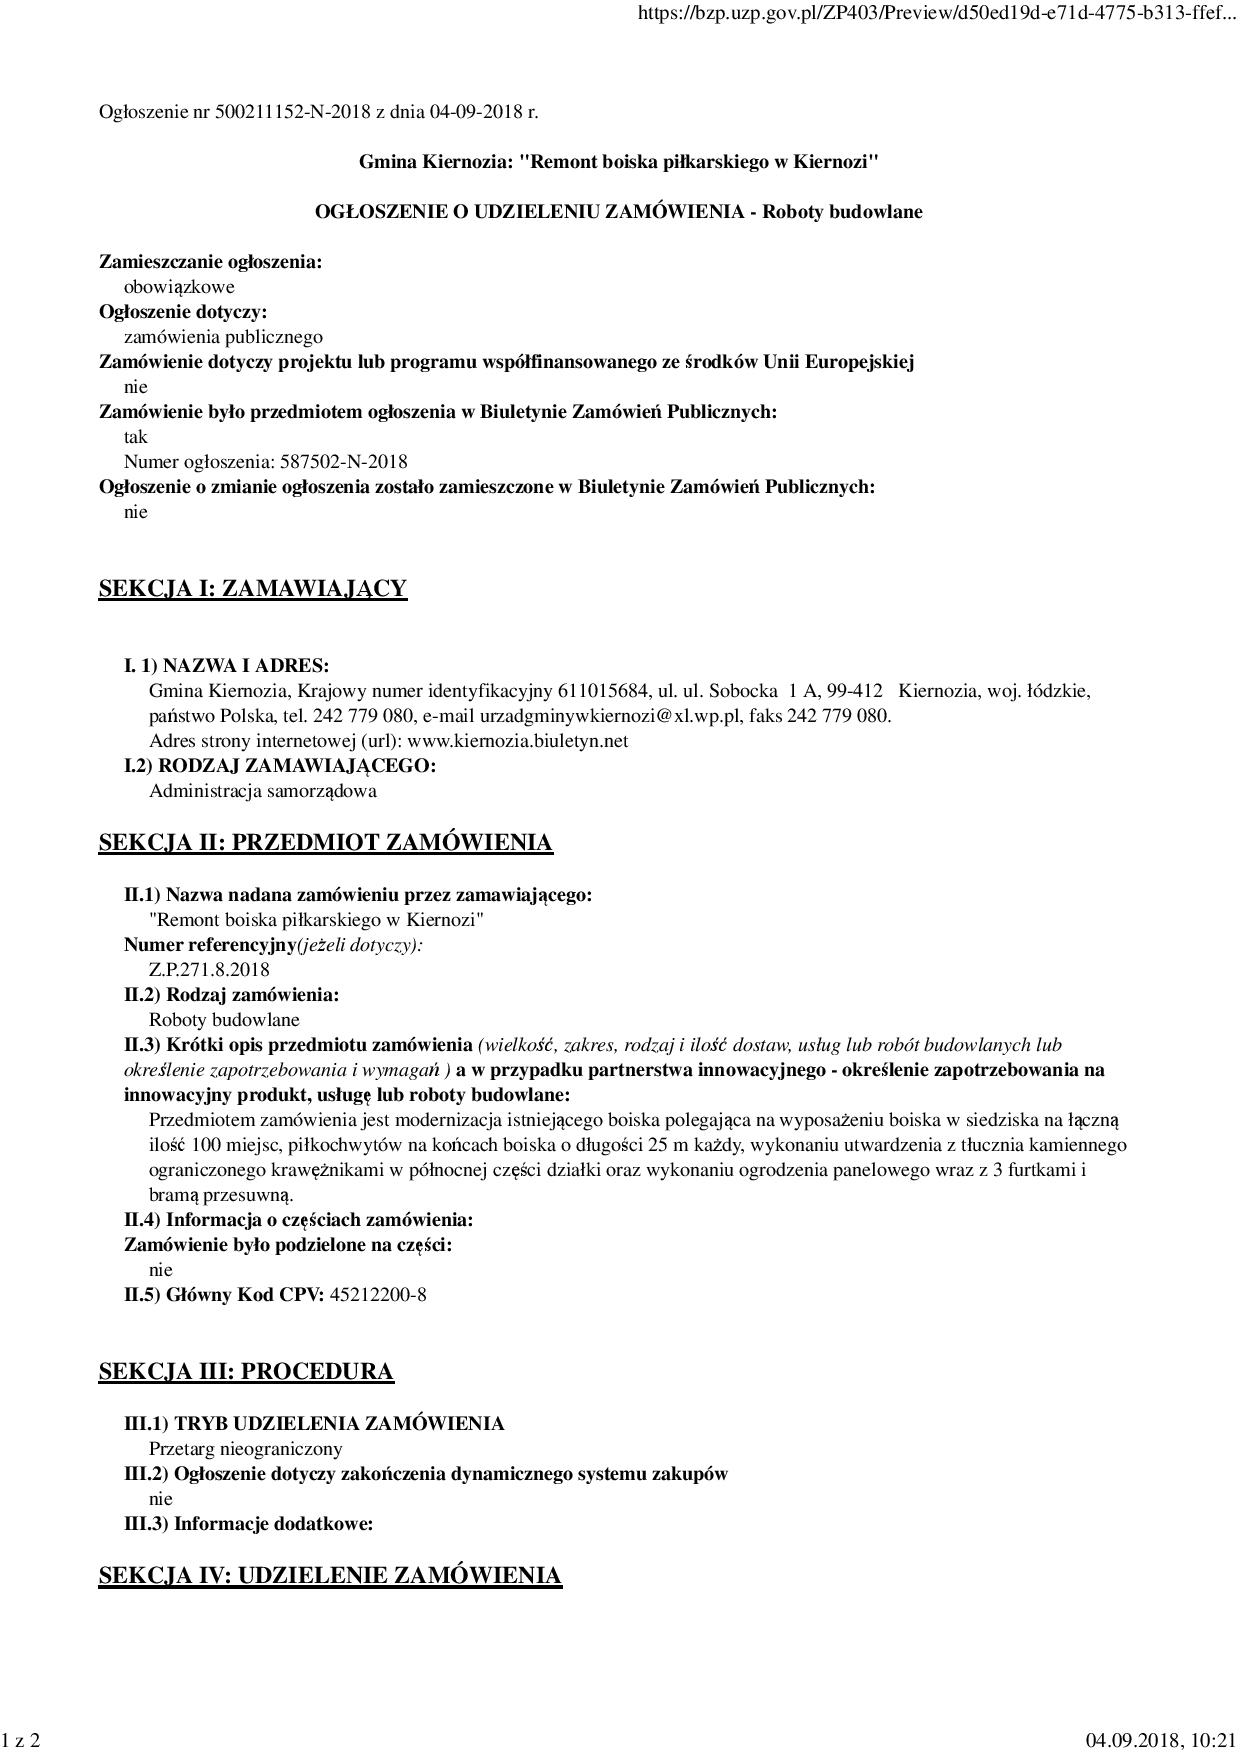       document-page-001.jpg